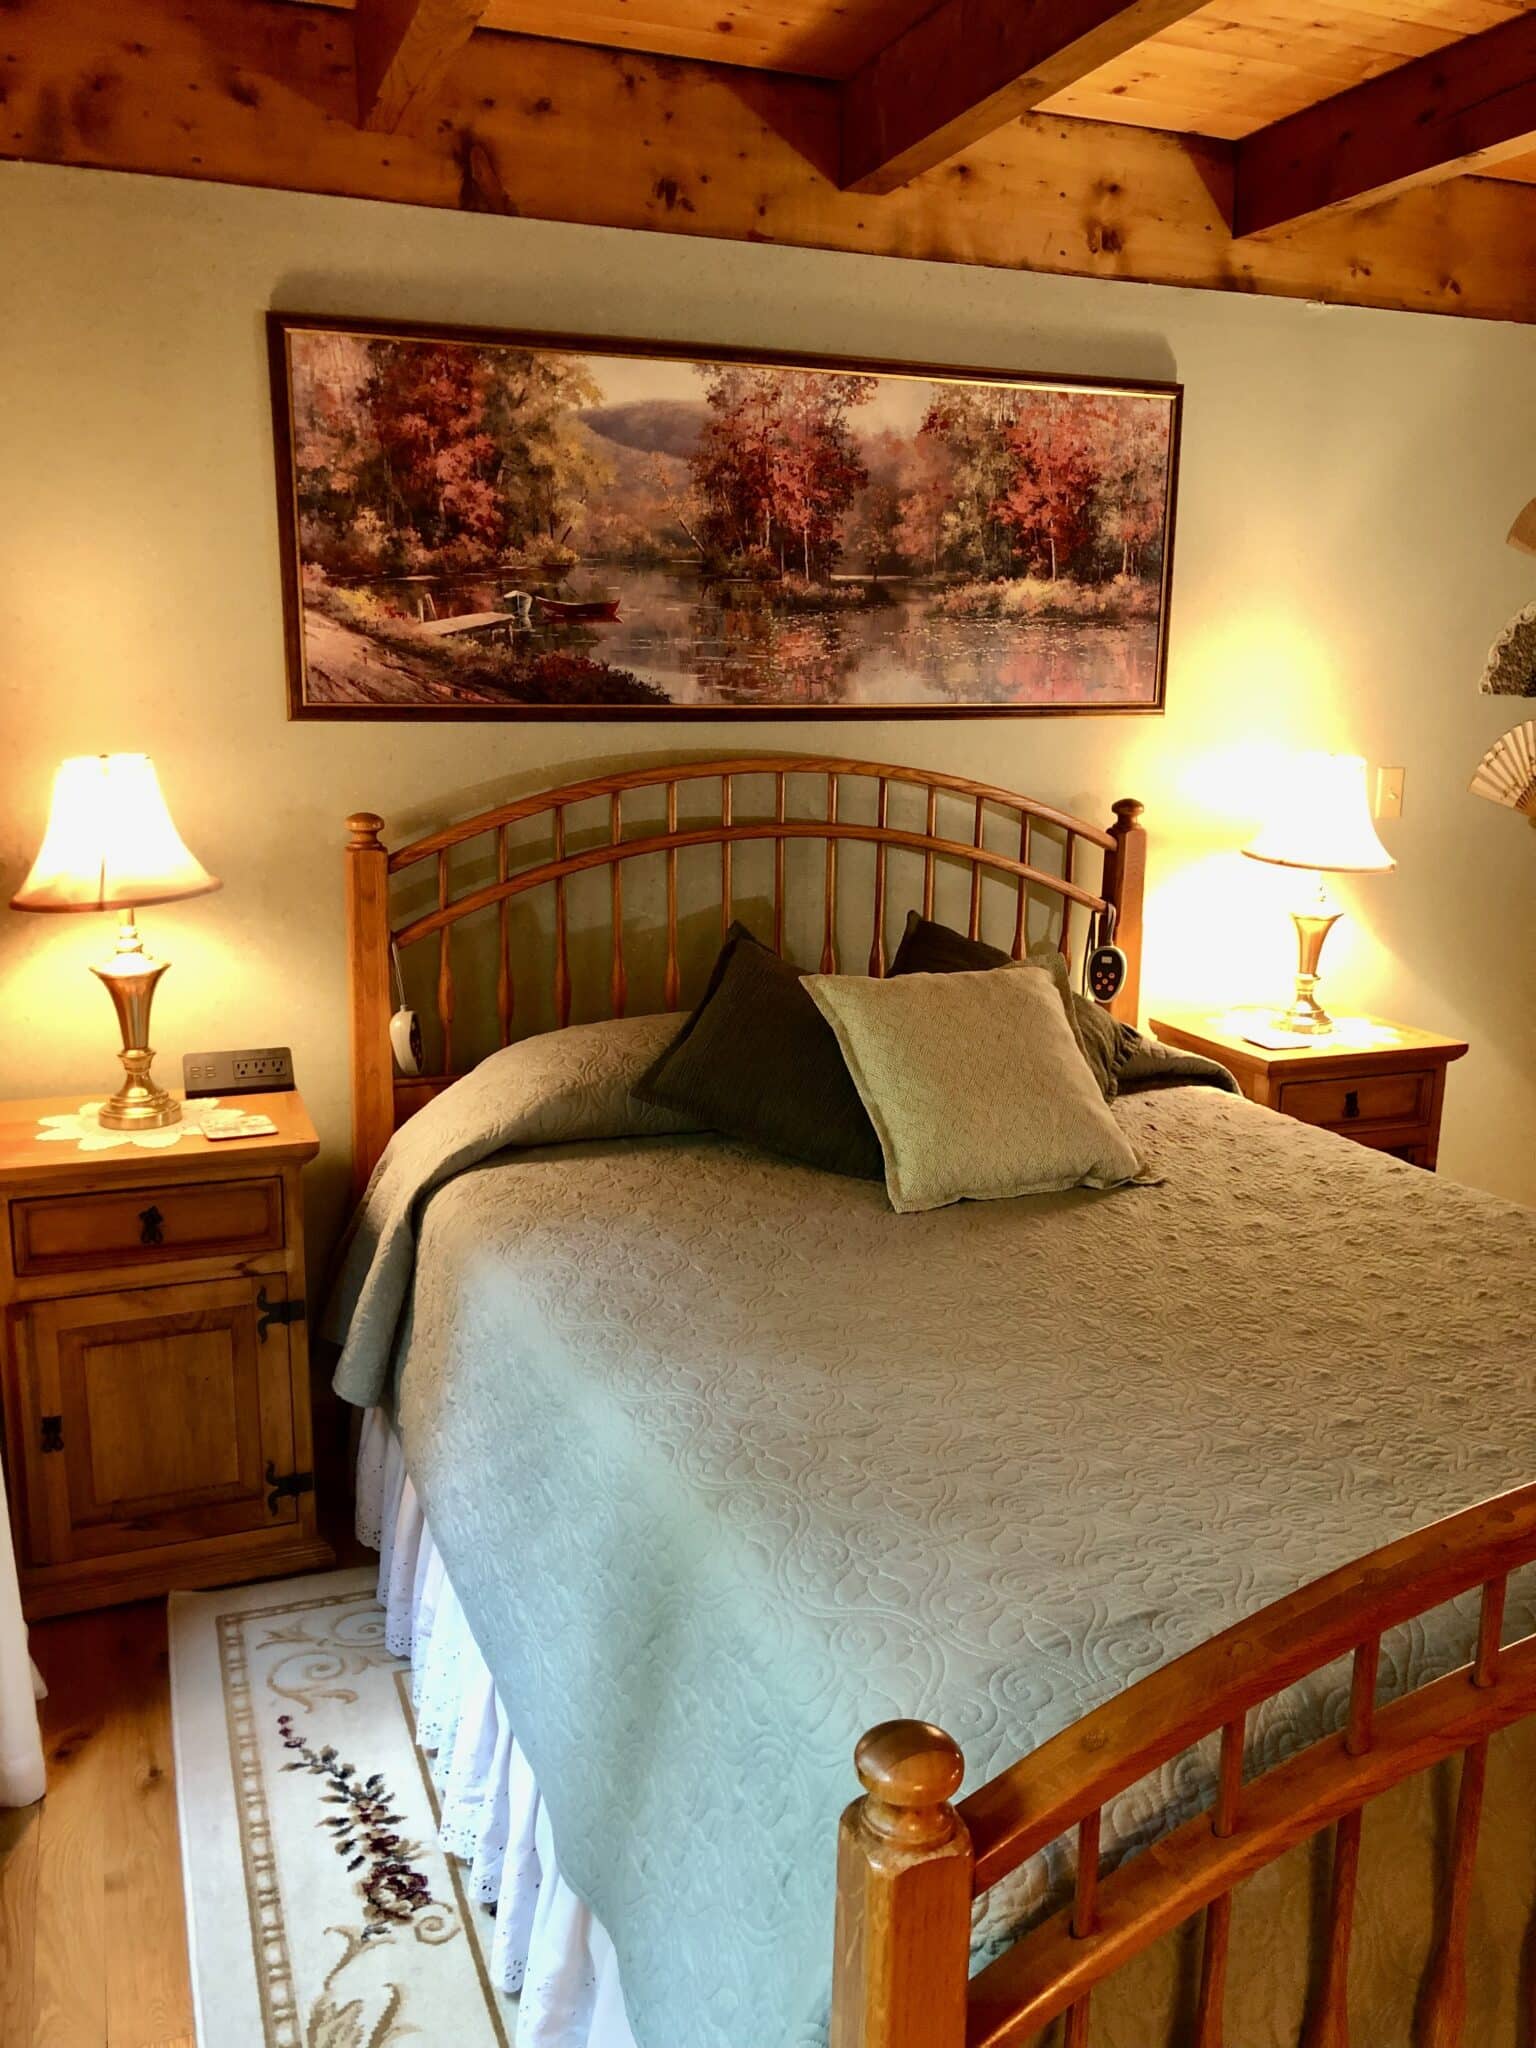 The Monument Room Queen size bed, 2 nightstands and lamps under a fall forest painting.